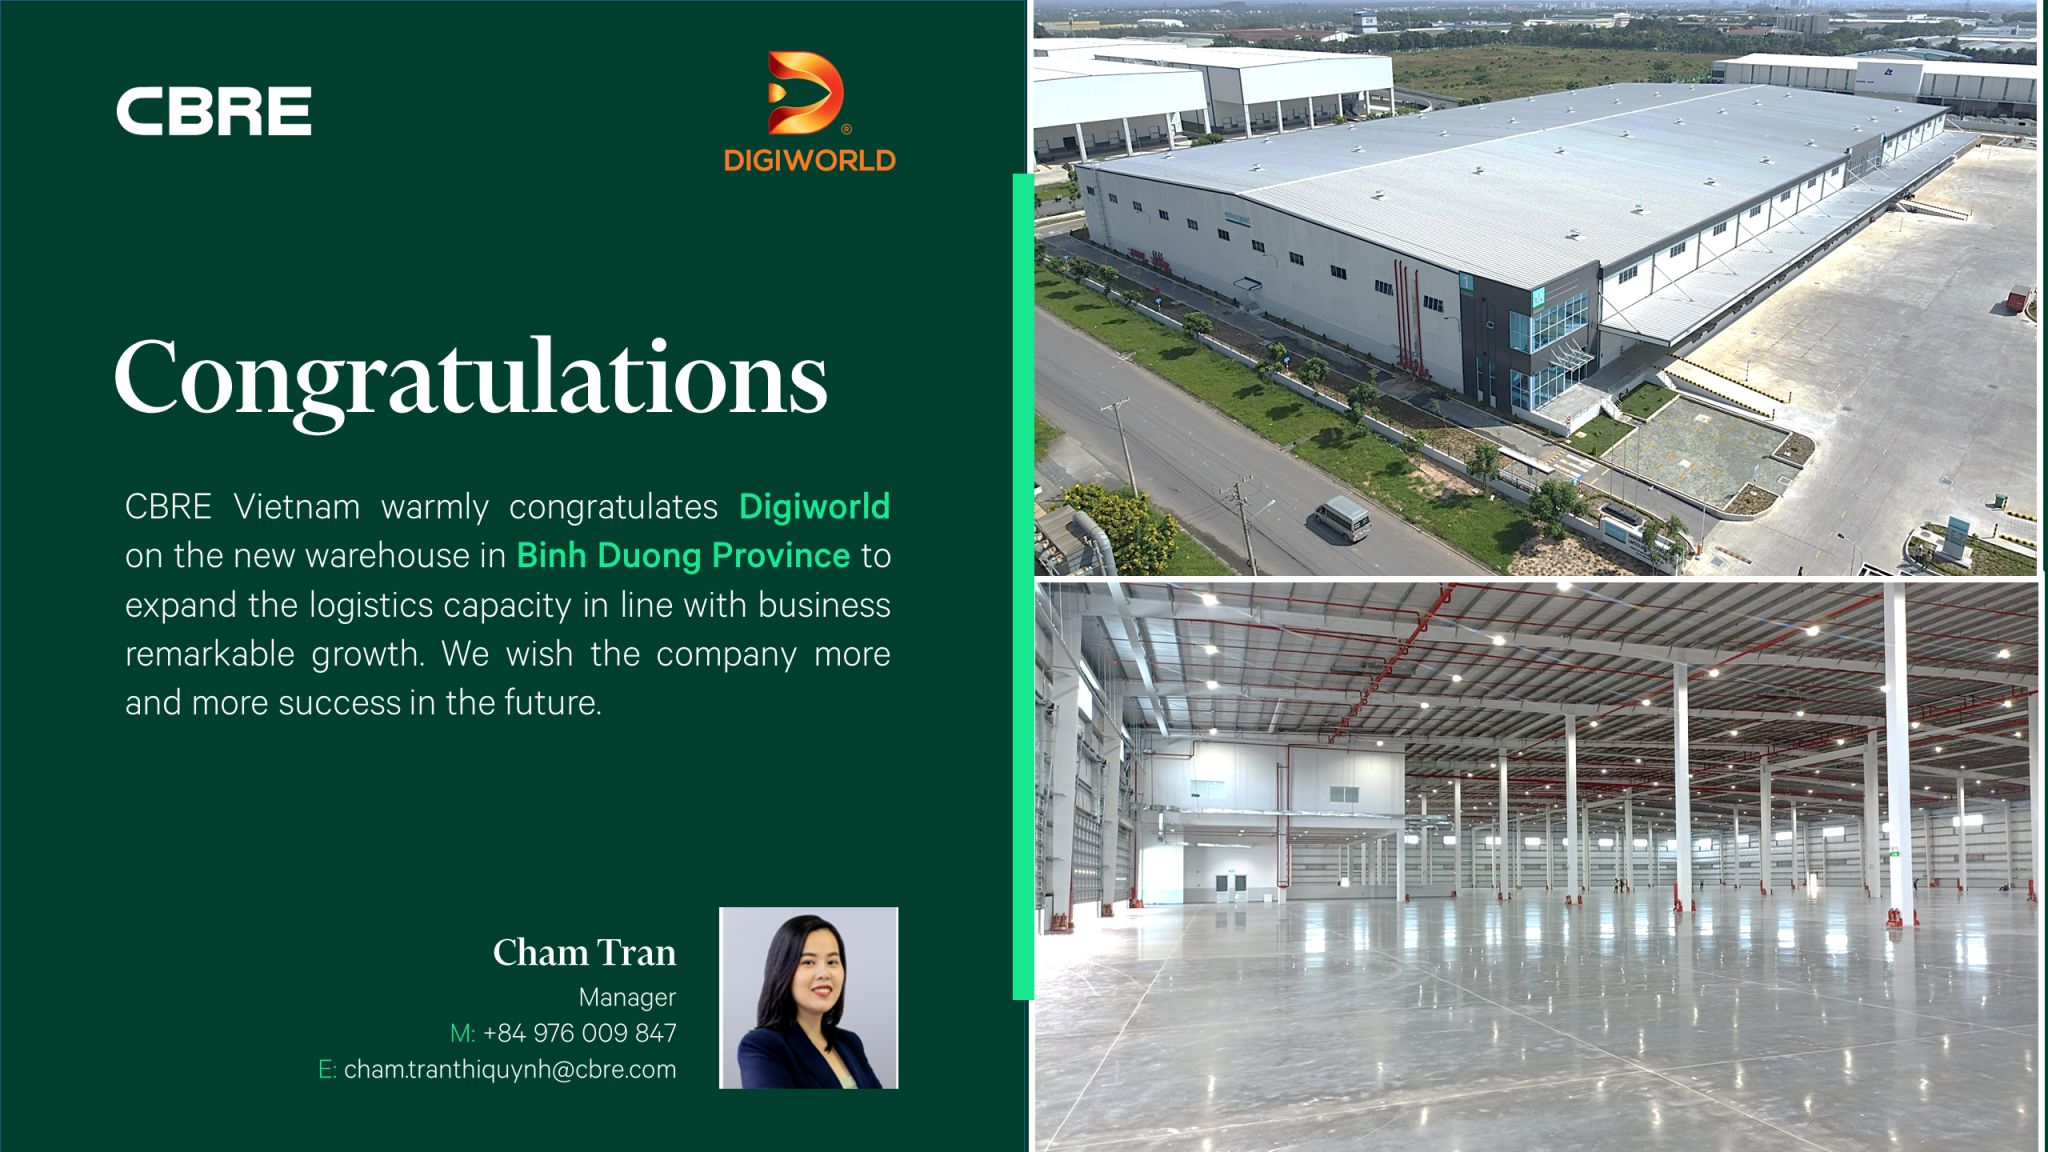 CBRE BECOMES THE LEAD AGENT FOR THE EMERGENT LE MINH XUAN 3 LOGISTICS CENTER